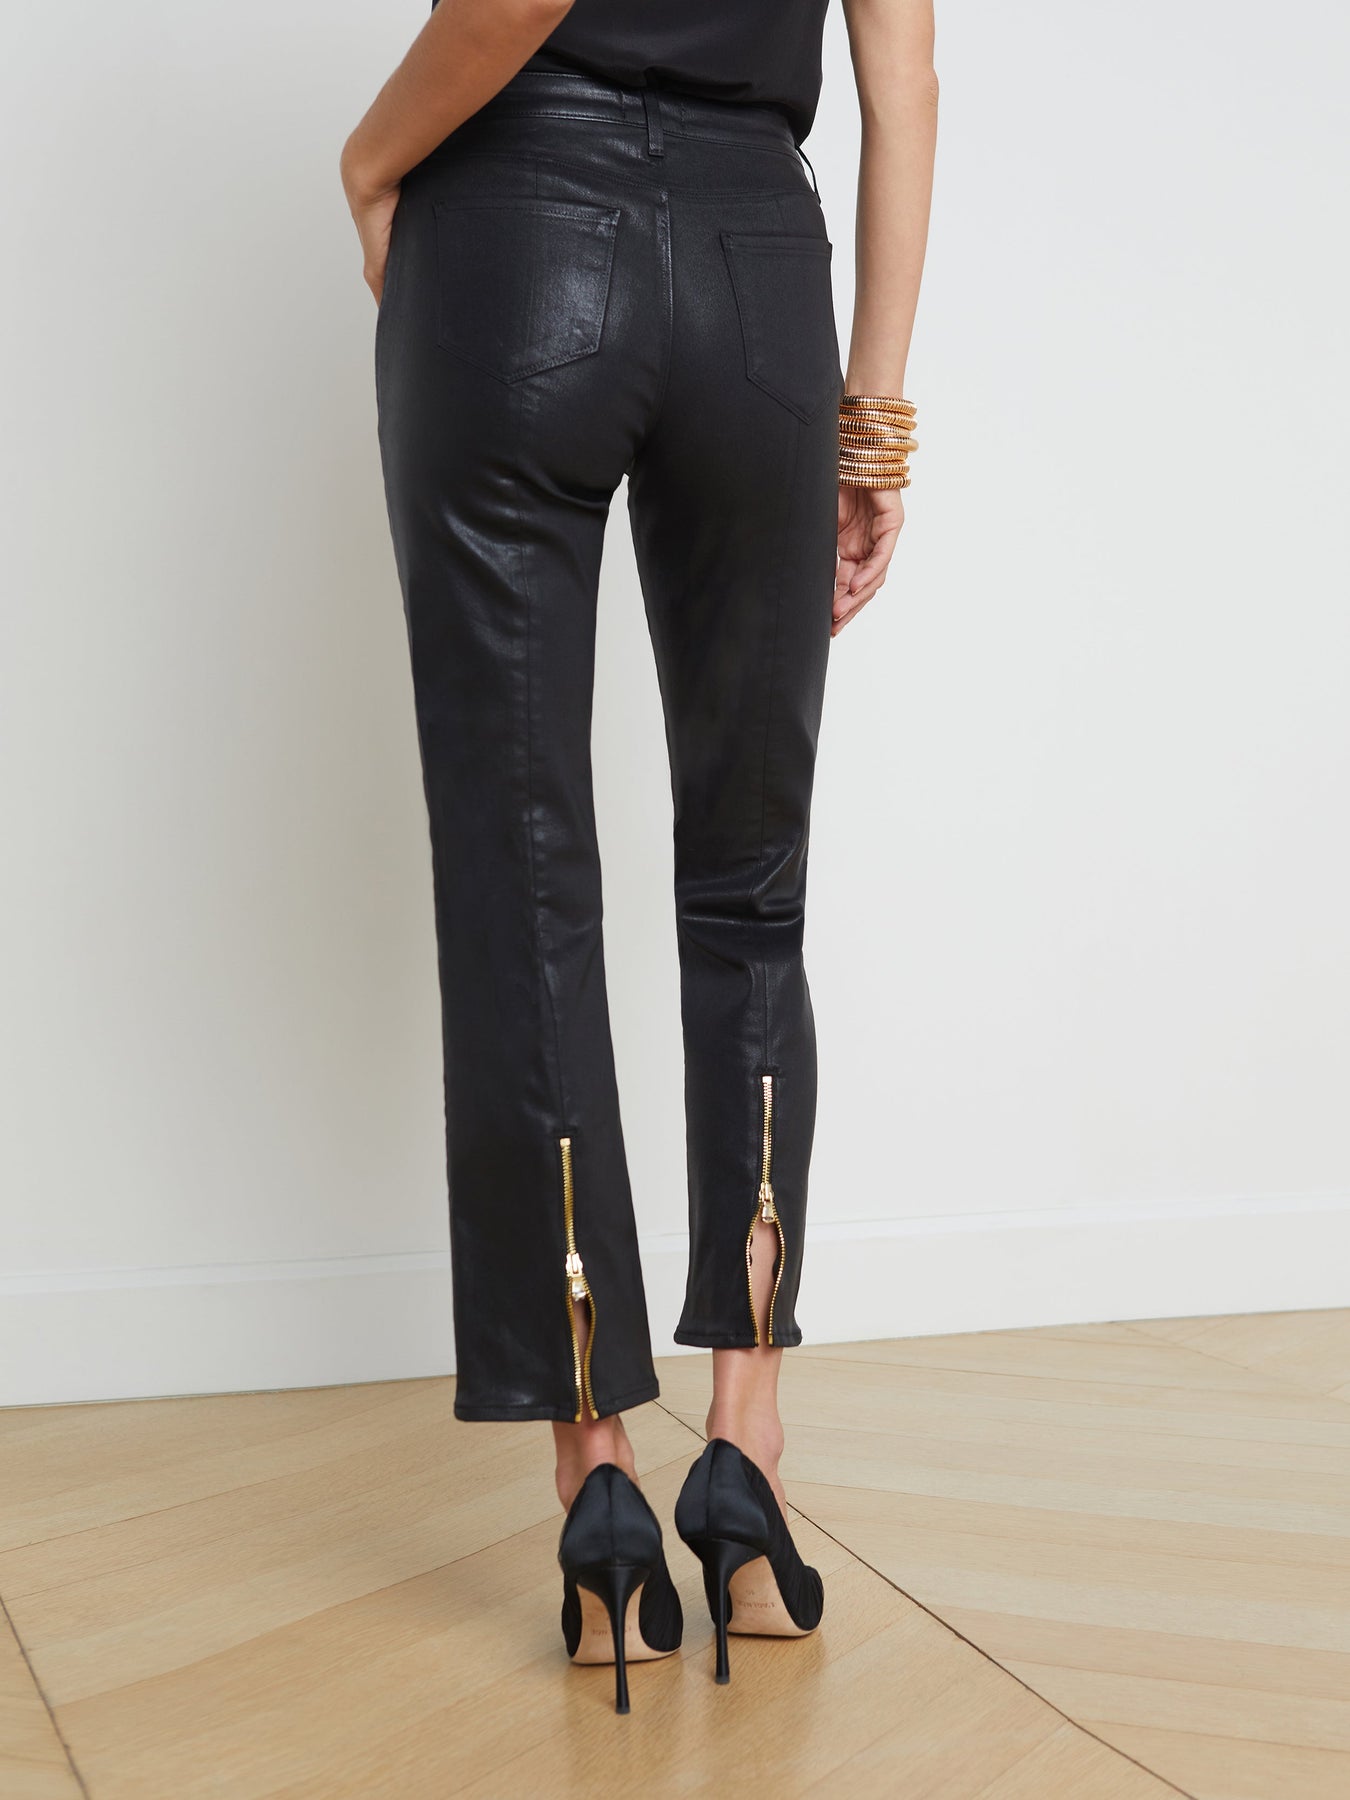 Varley  The Relaxed Pant 27.5 Black - Tryst Boutique